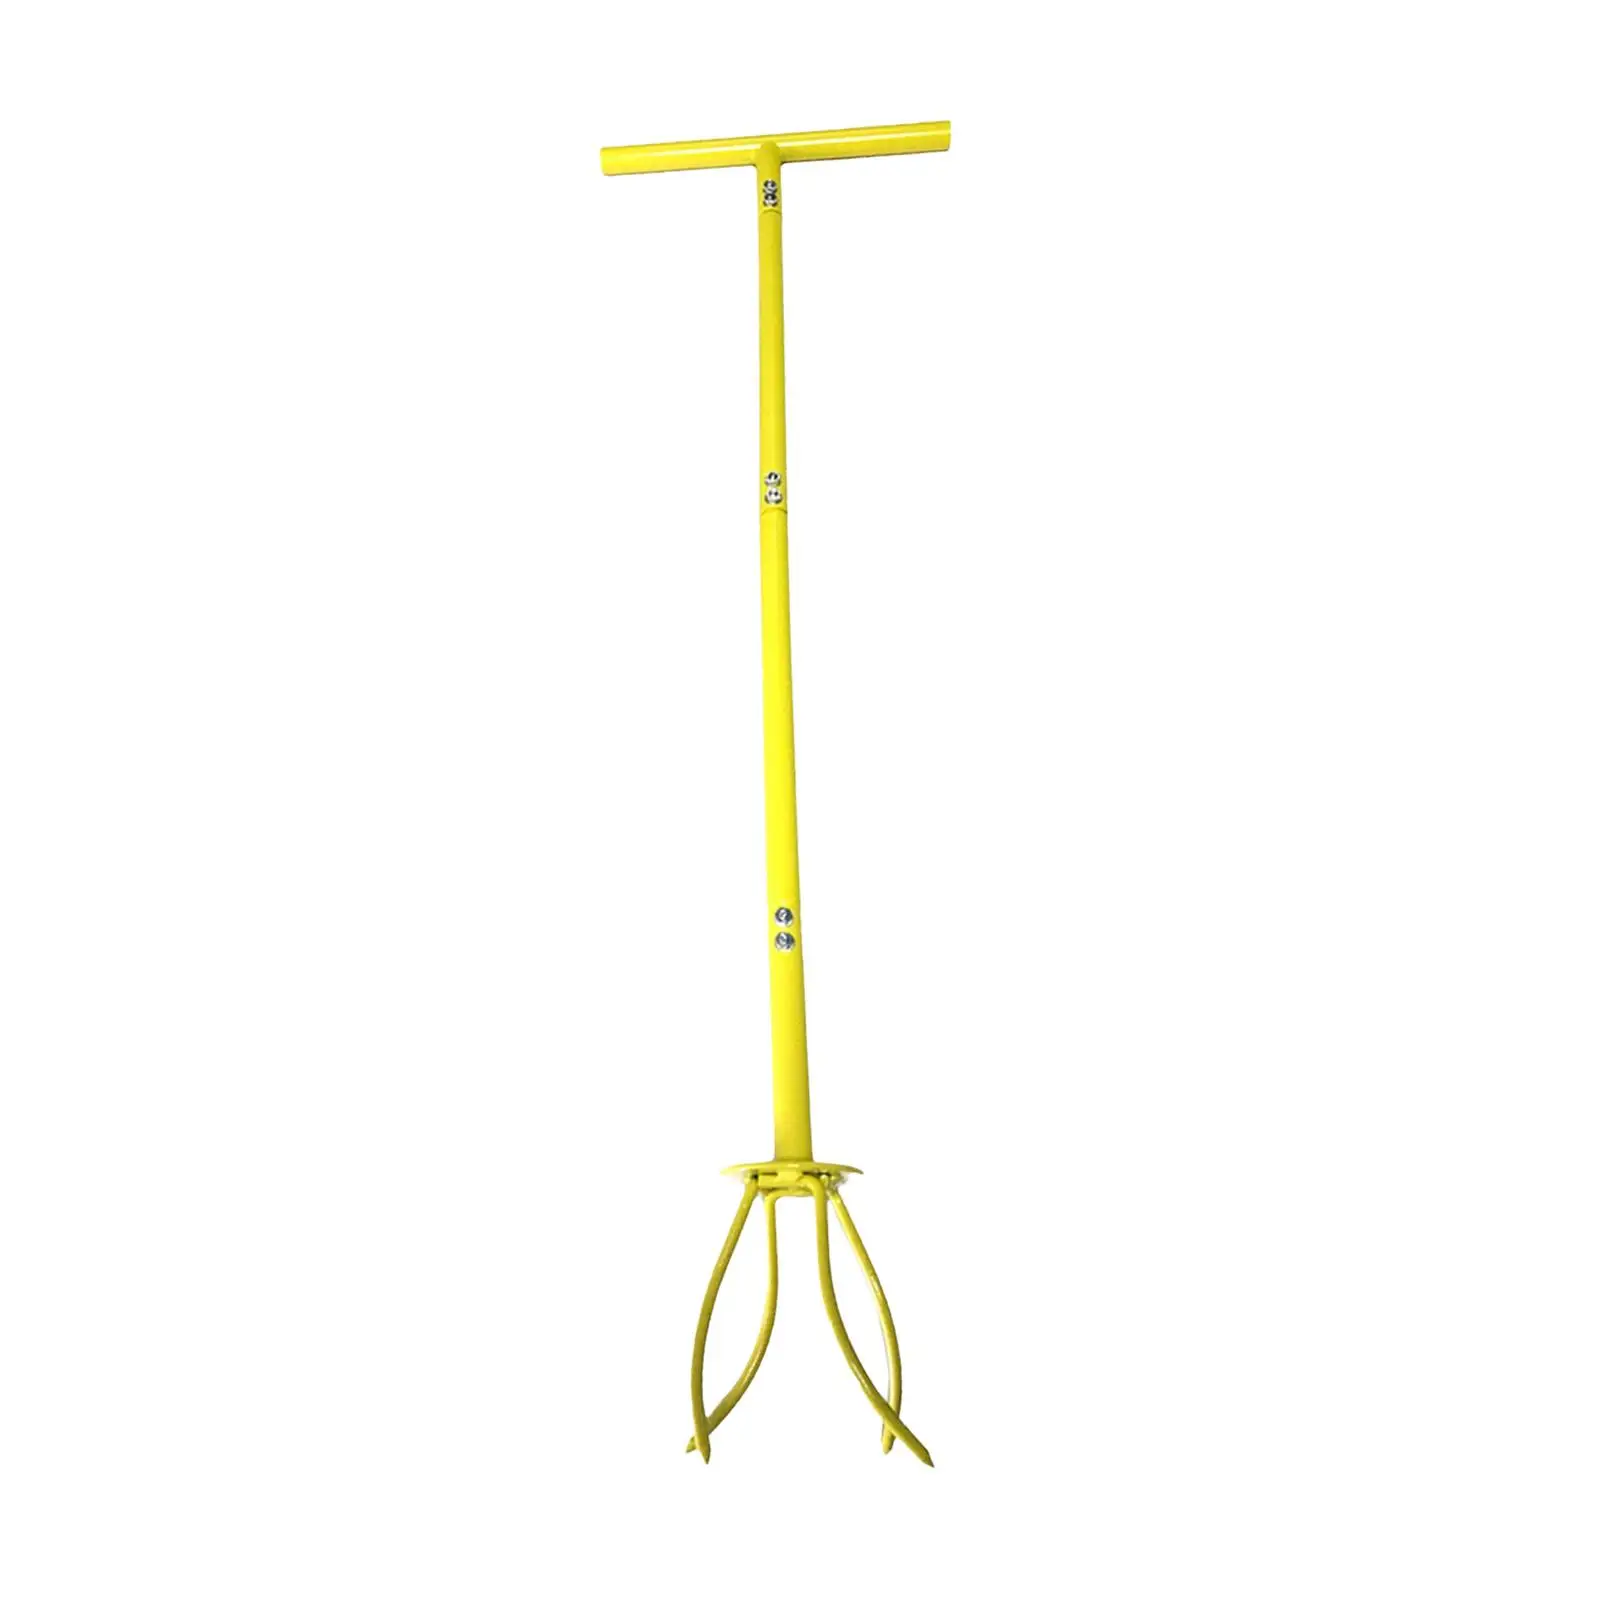 Manual Hand Tiller Rust Resistant Heavy Duty for Cultivate, Loosen, Aerate with Adjustable Shaft with A Removable Big Claw